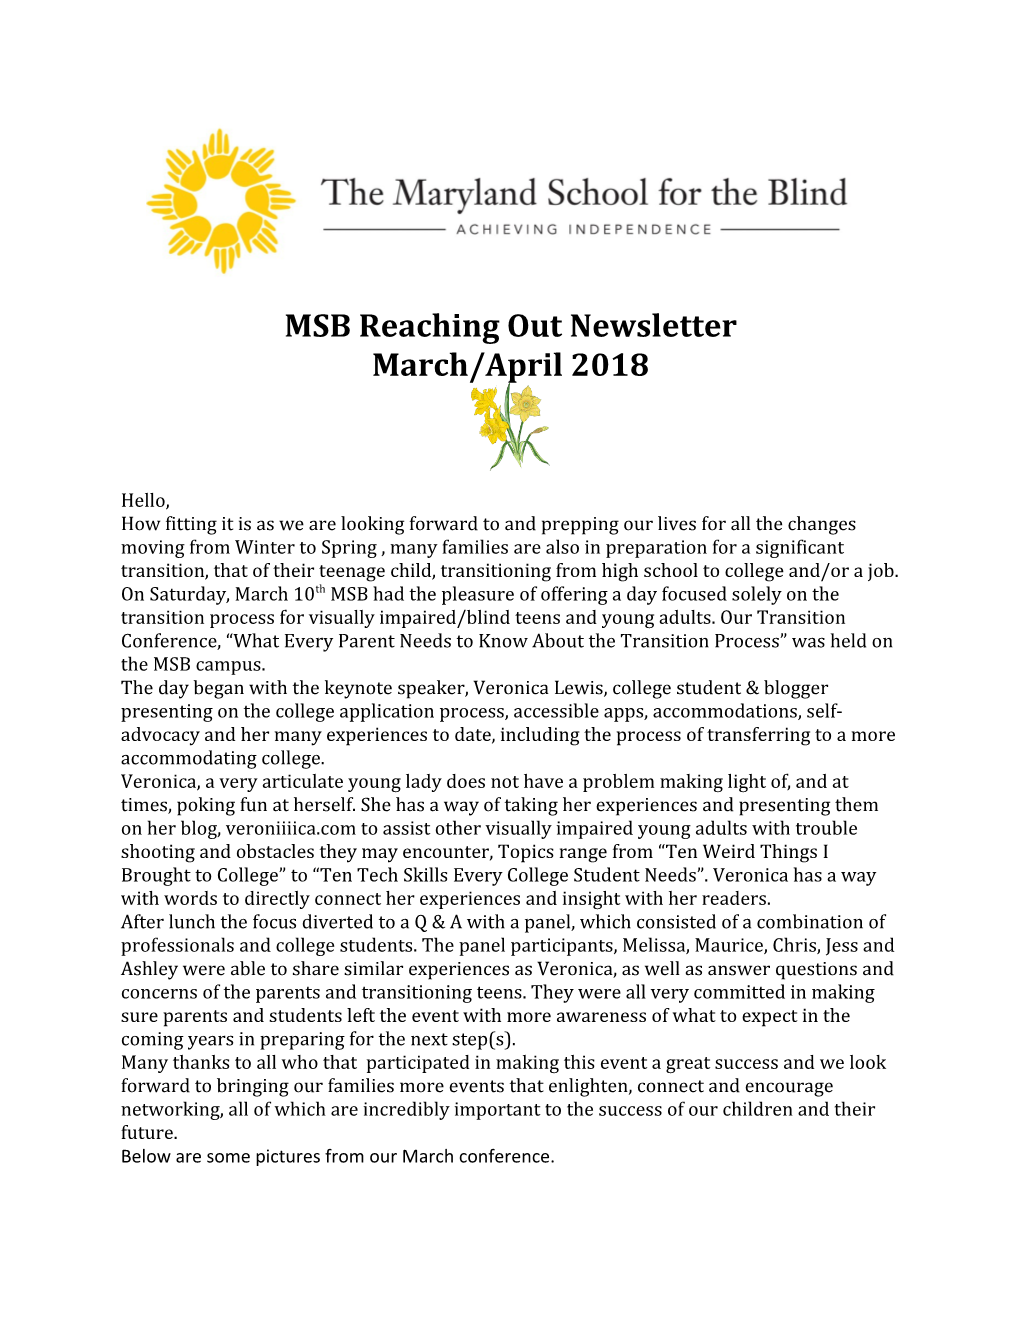 MSB Reaching out Newsletter